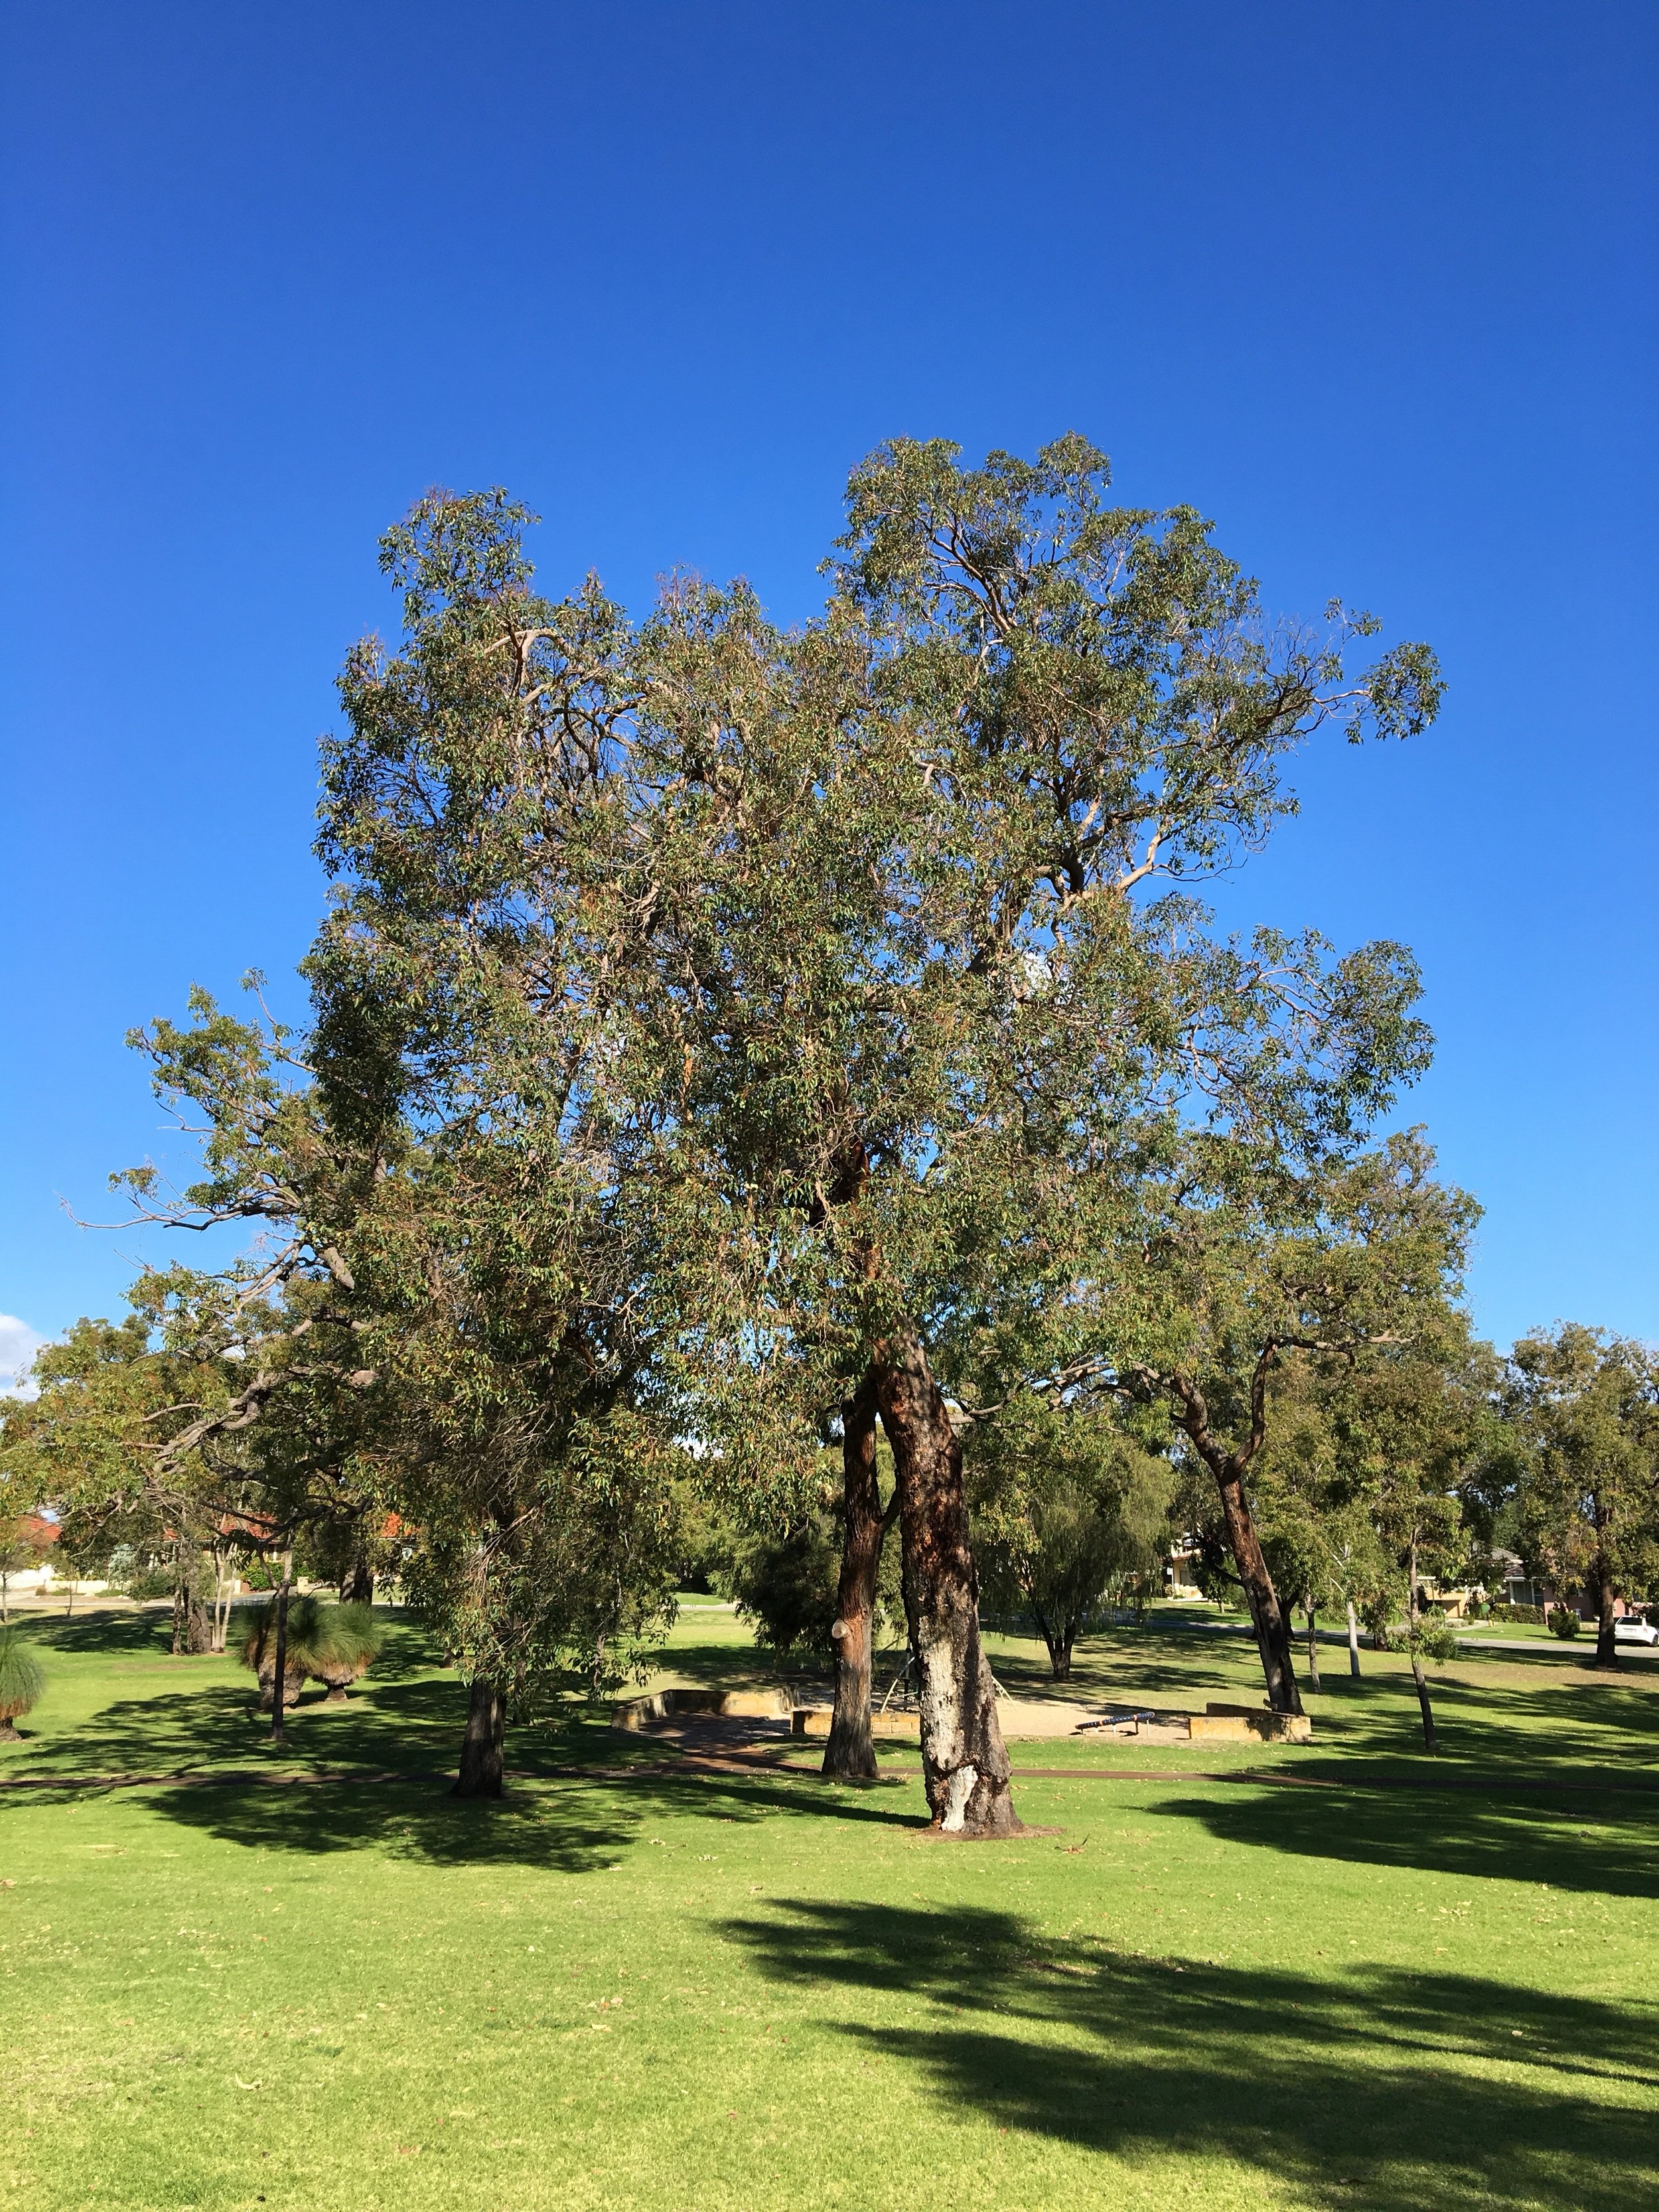 Large native trees in a small urban park.